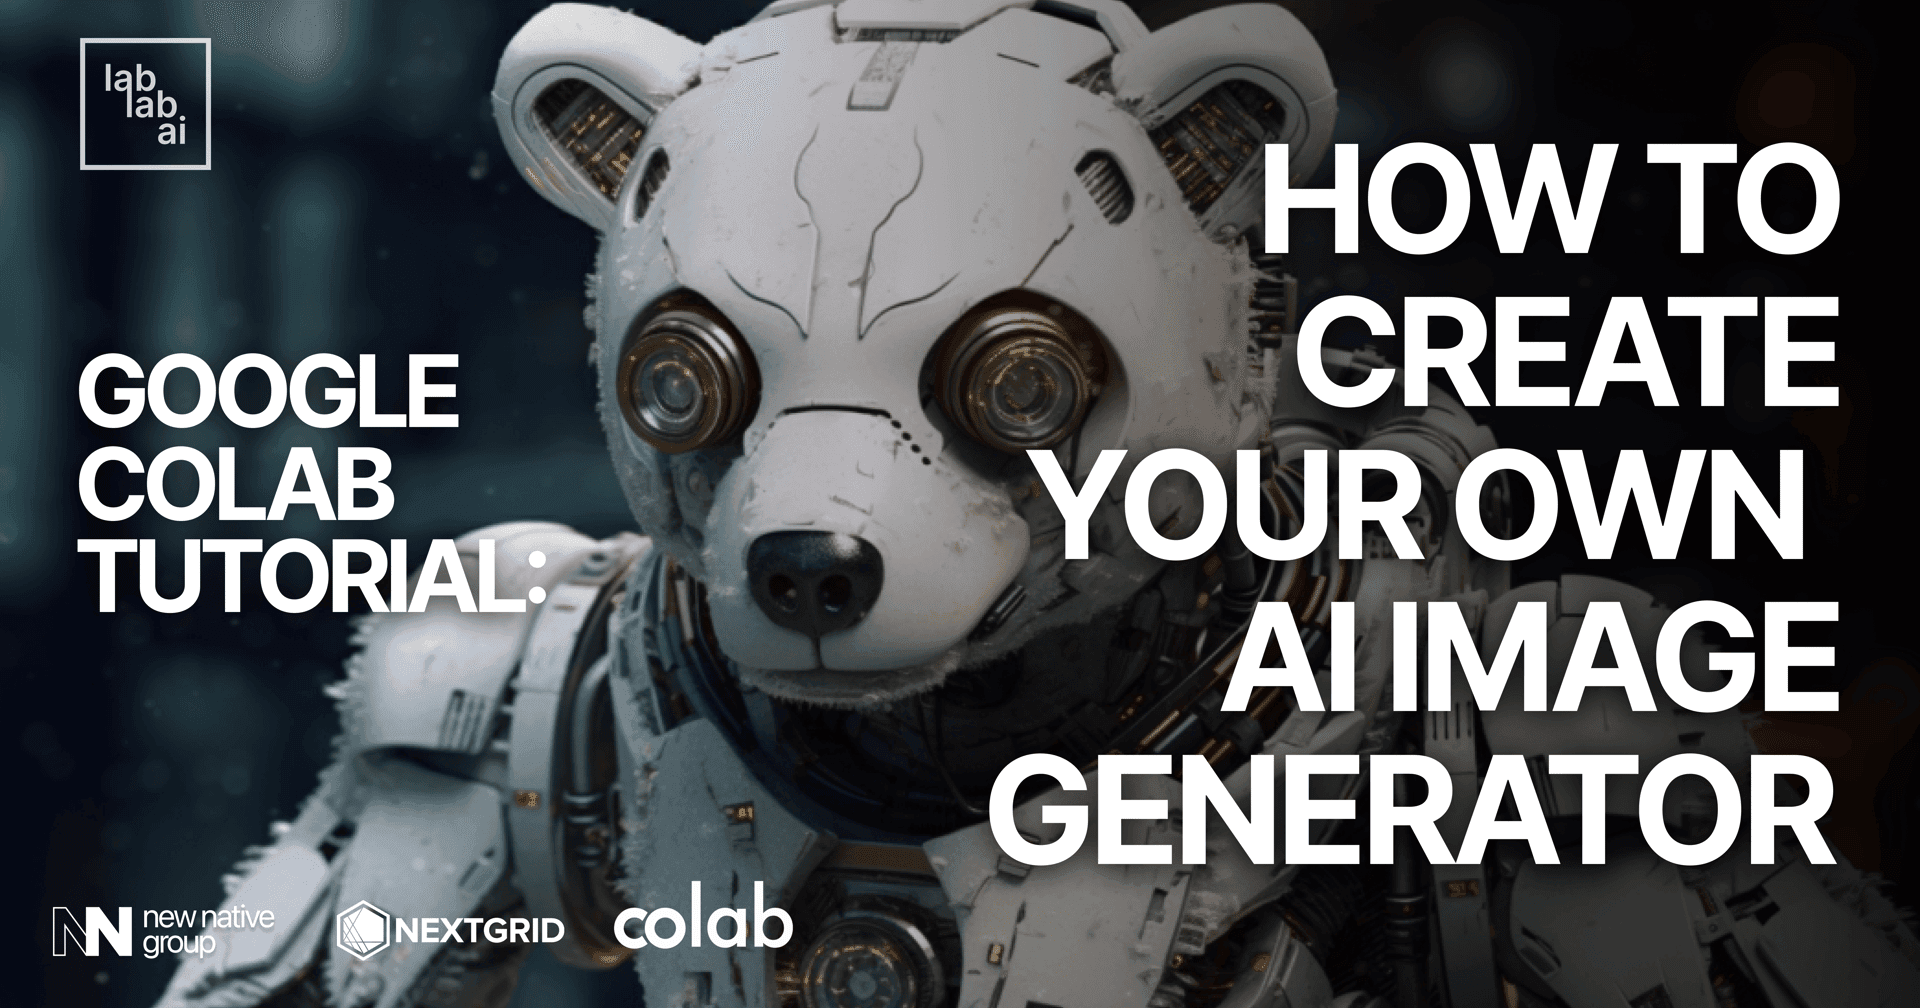 Google Colab tutorial: How to create your own AI image generator